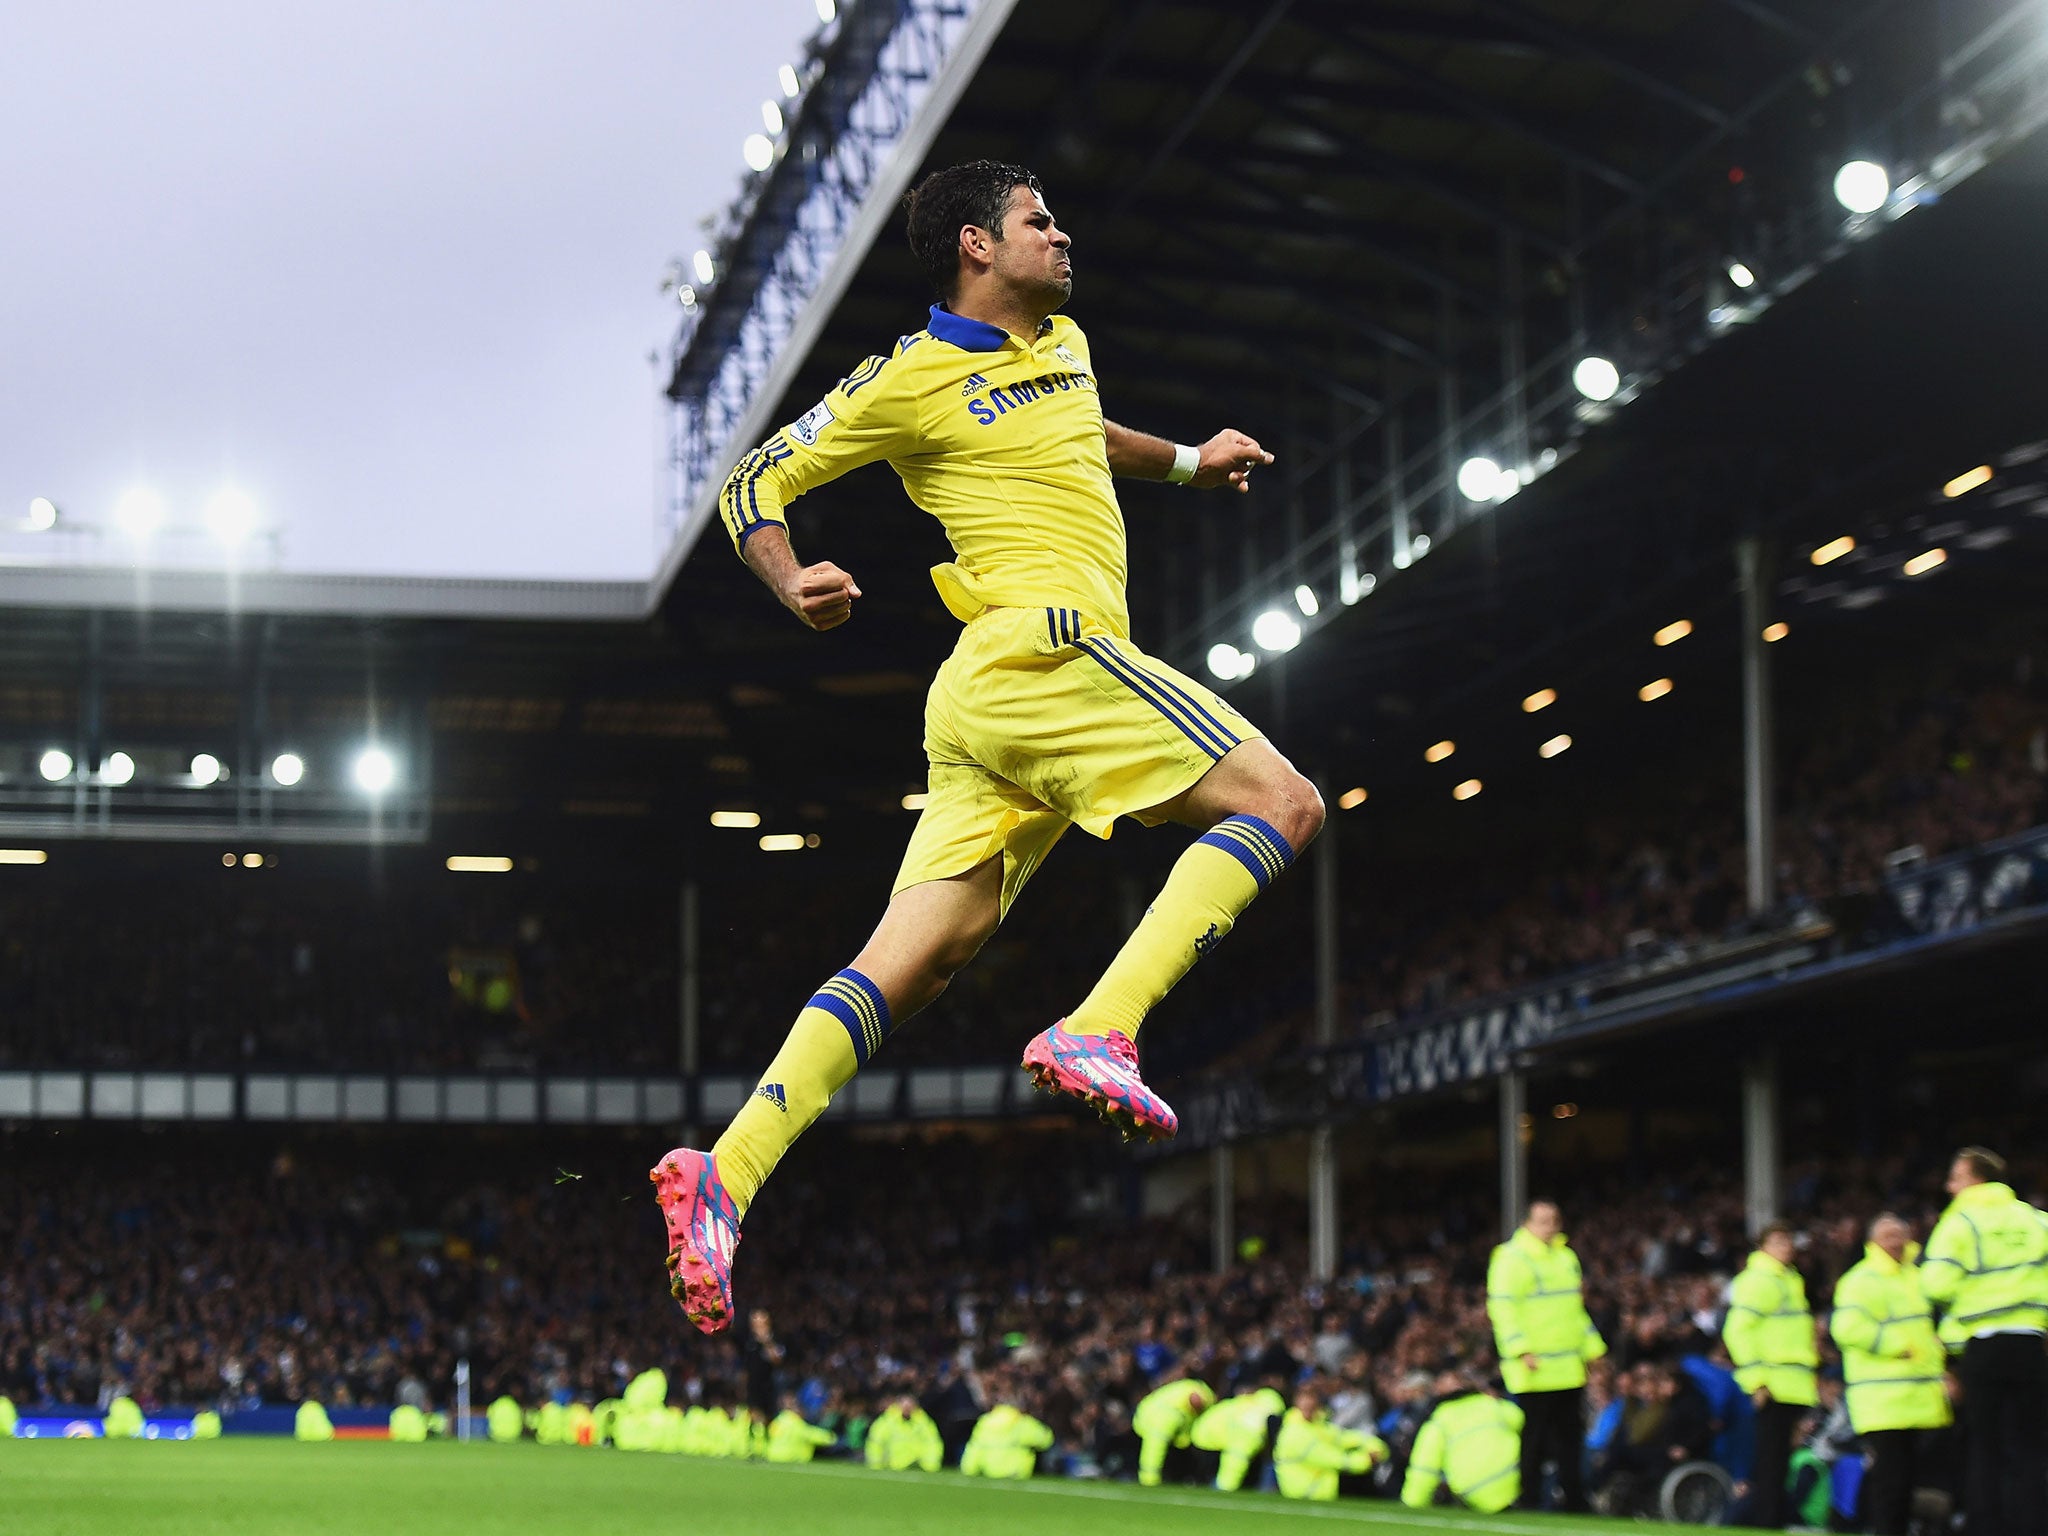 Chelsea striker Diego Costa celebrates after scoring the final goal of his team’s 6-3 victory at Everton